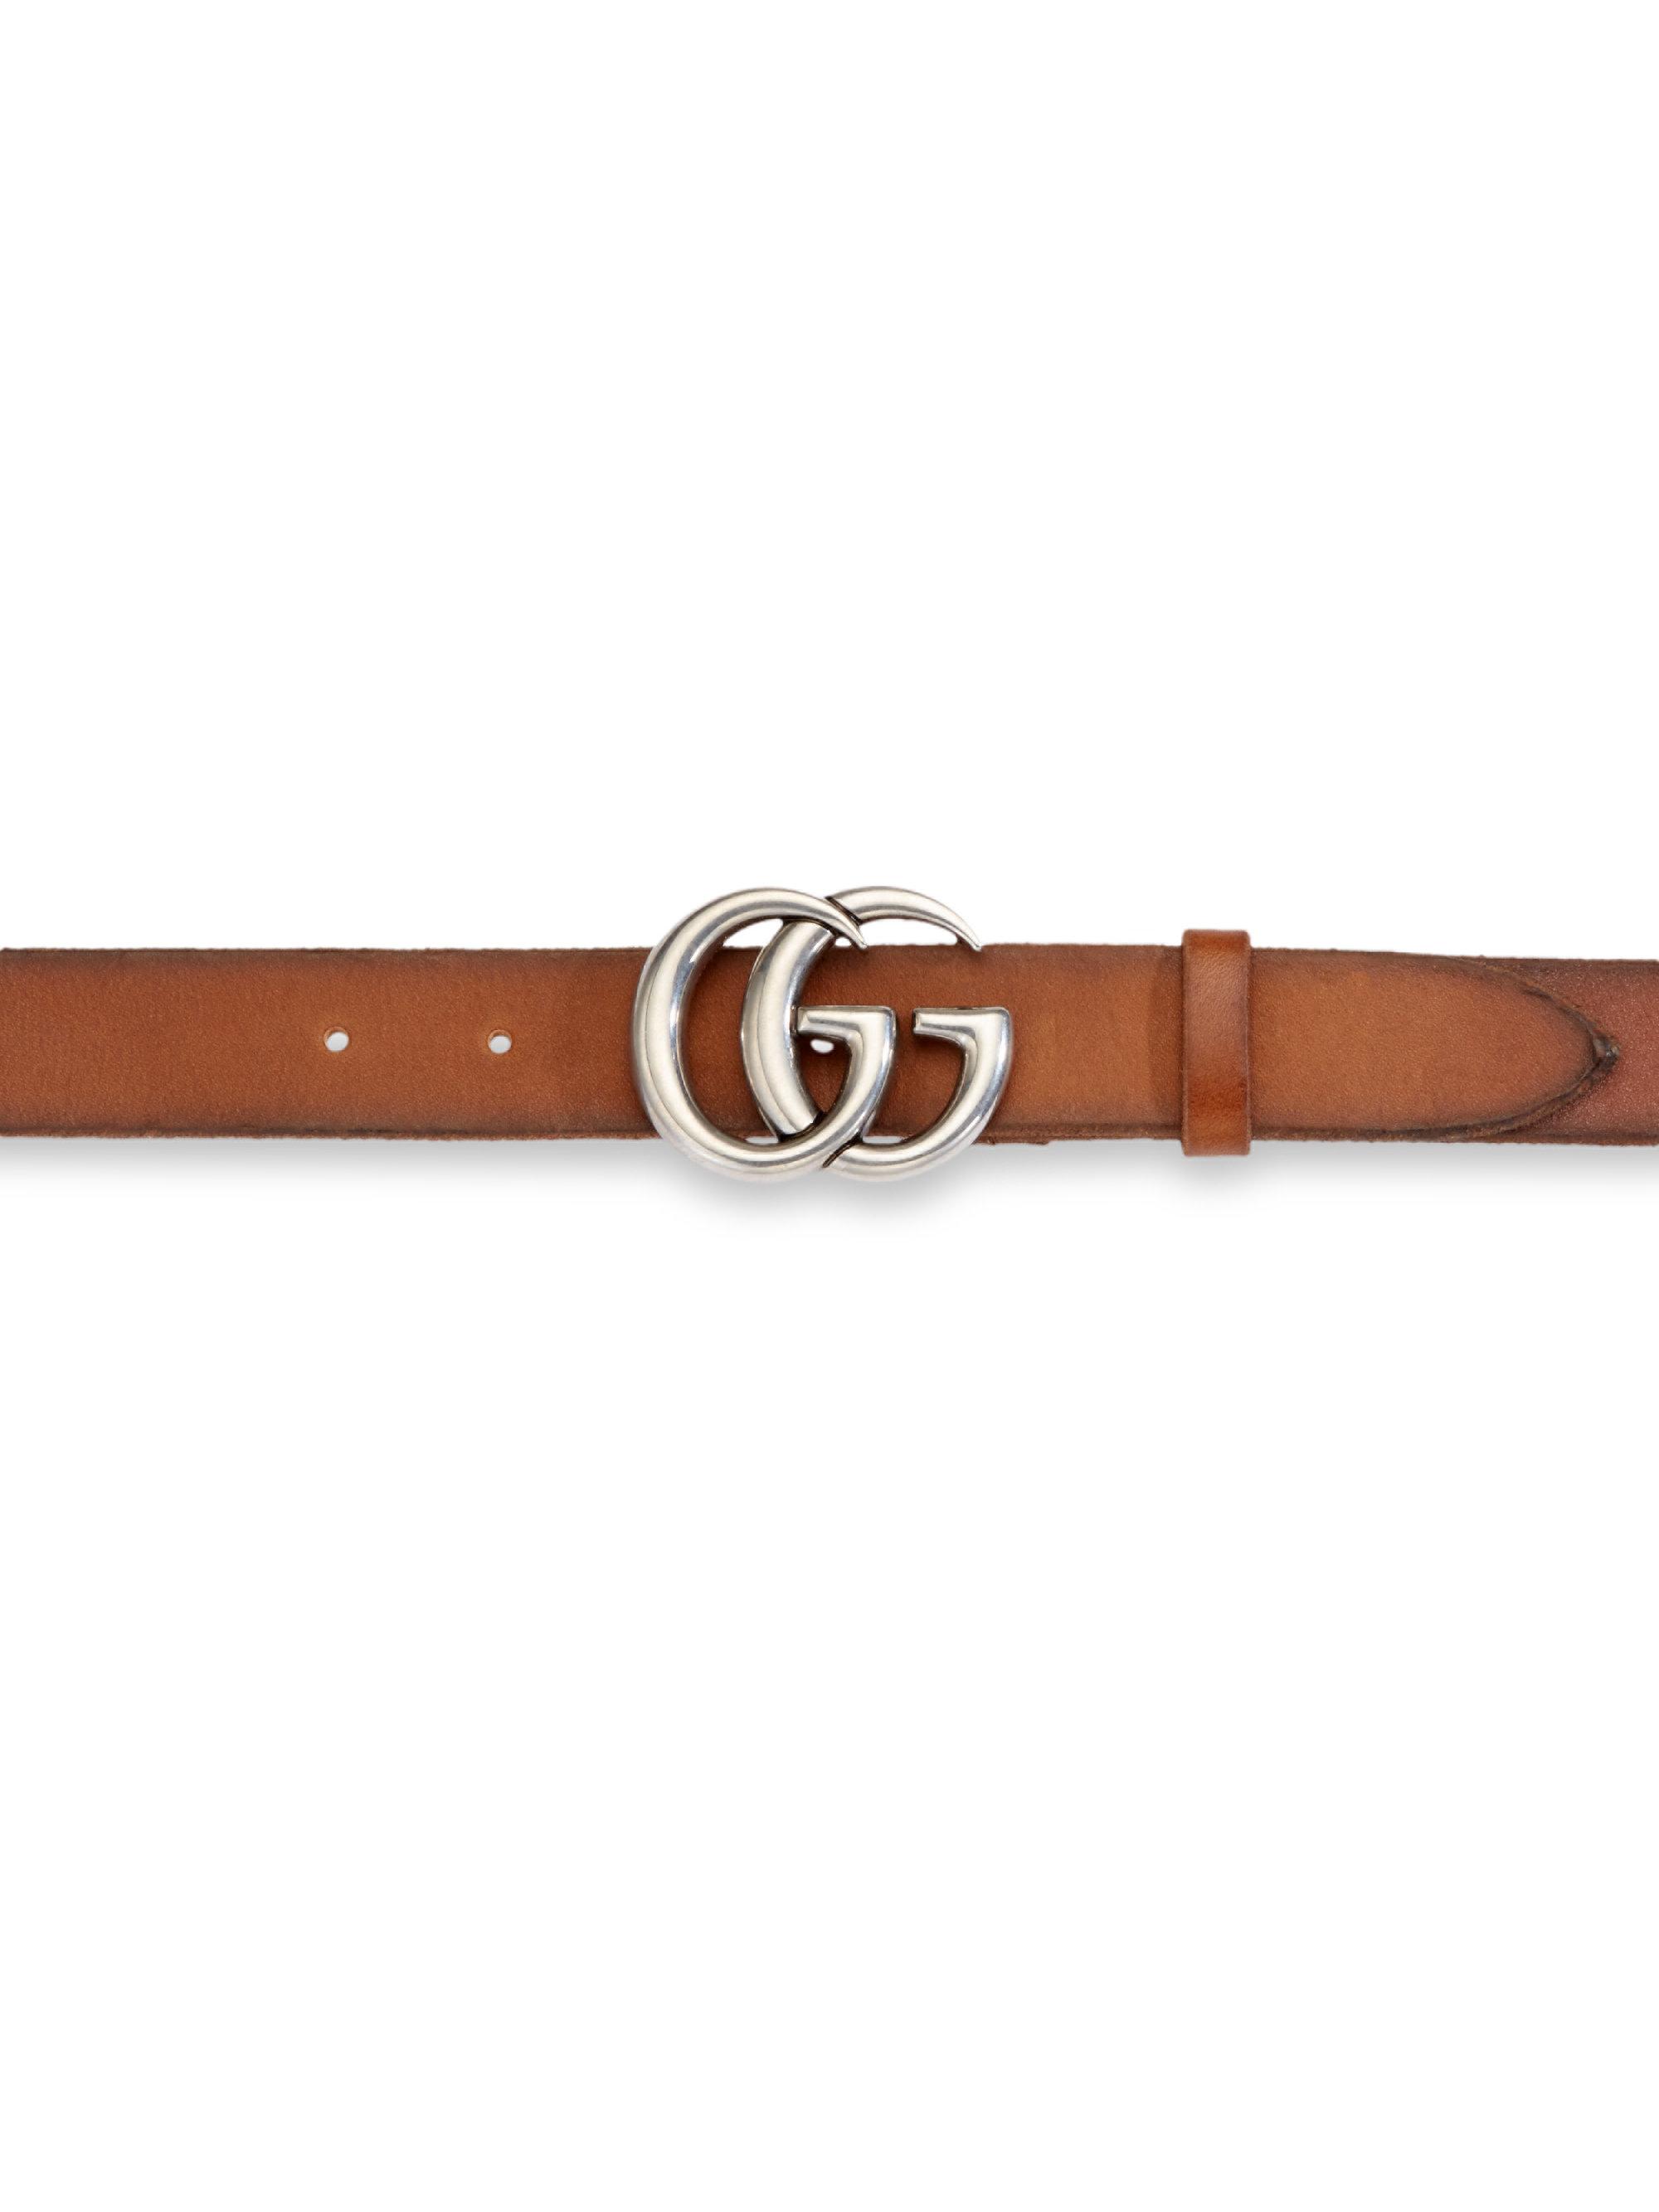 Gucci Gg Marmont Leather Belt in Brown for Men - Lyst